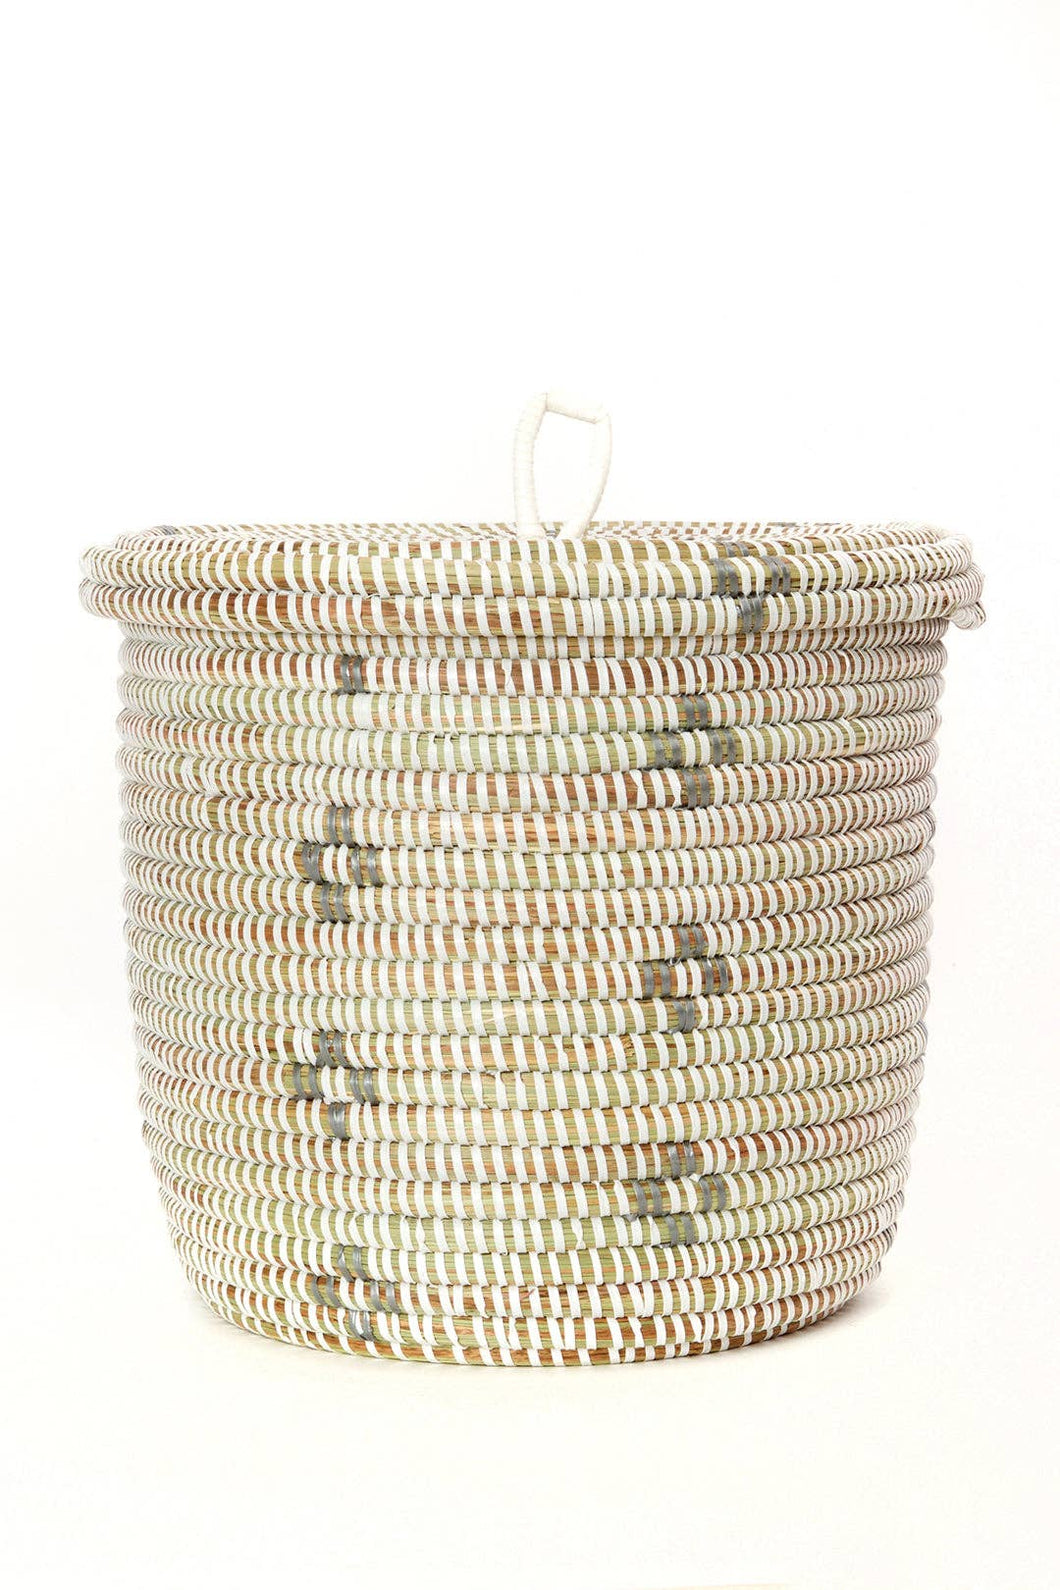 White and Silver Blossom Lidded Storage Basket